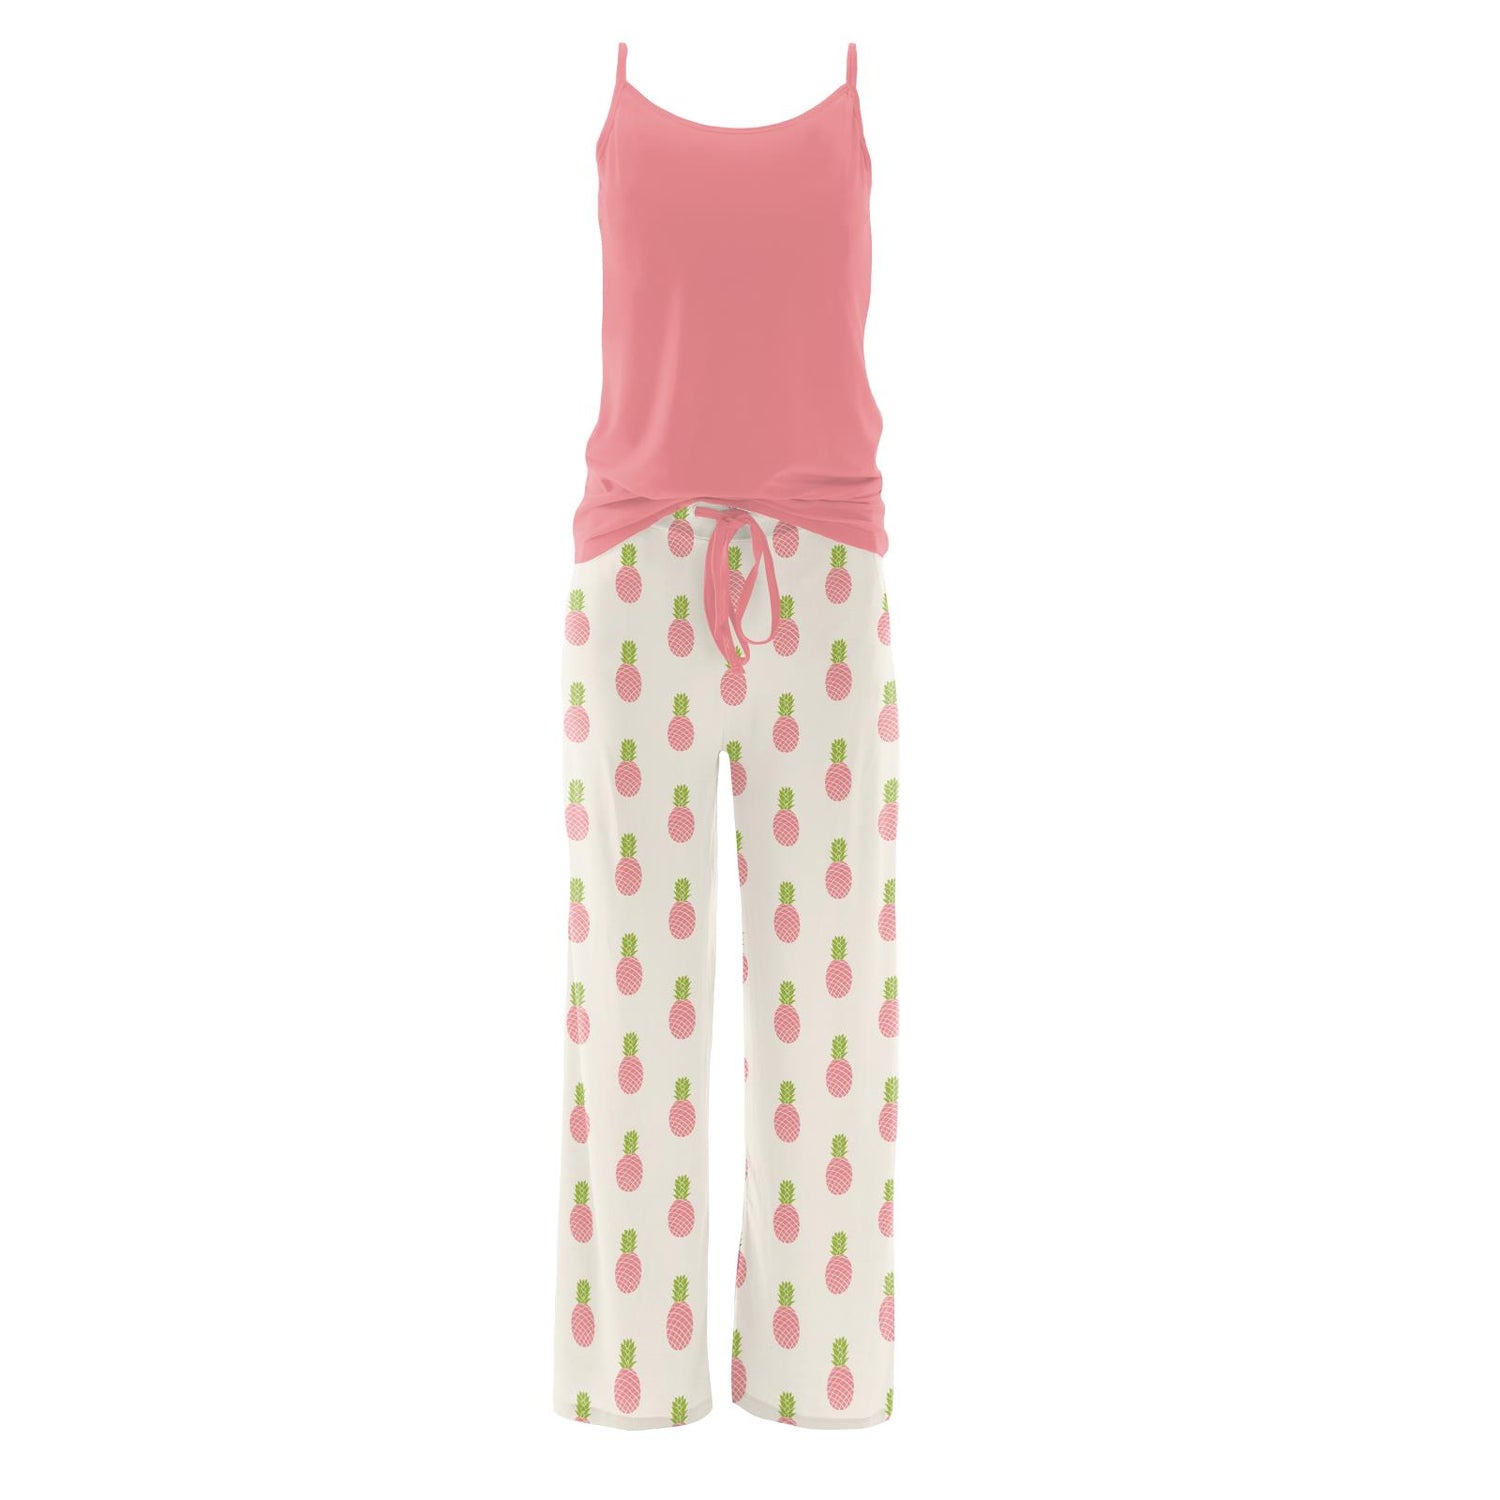 Cami and Print Lounge Pants Pajama Set in Strawberry Pineapples